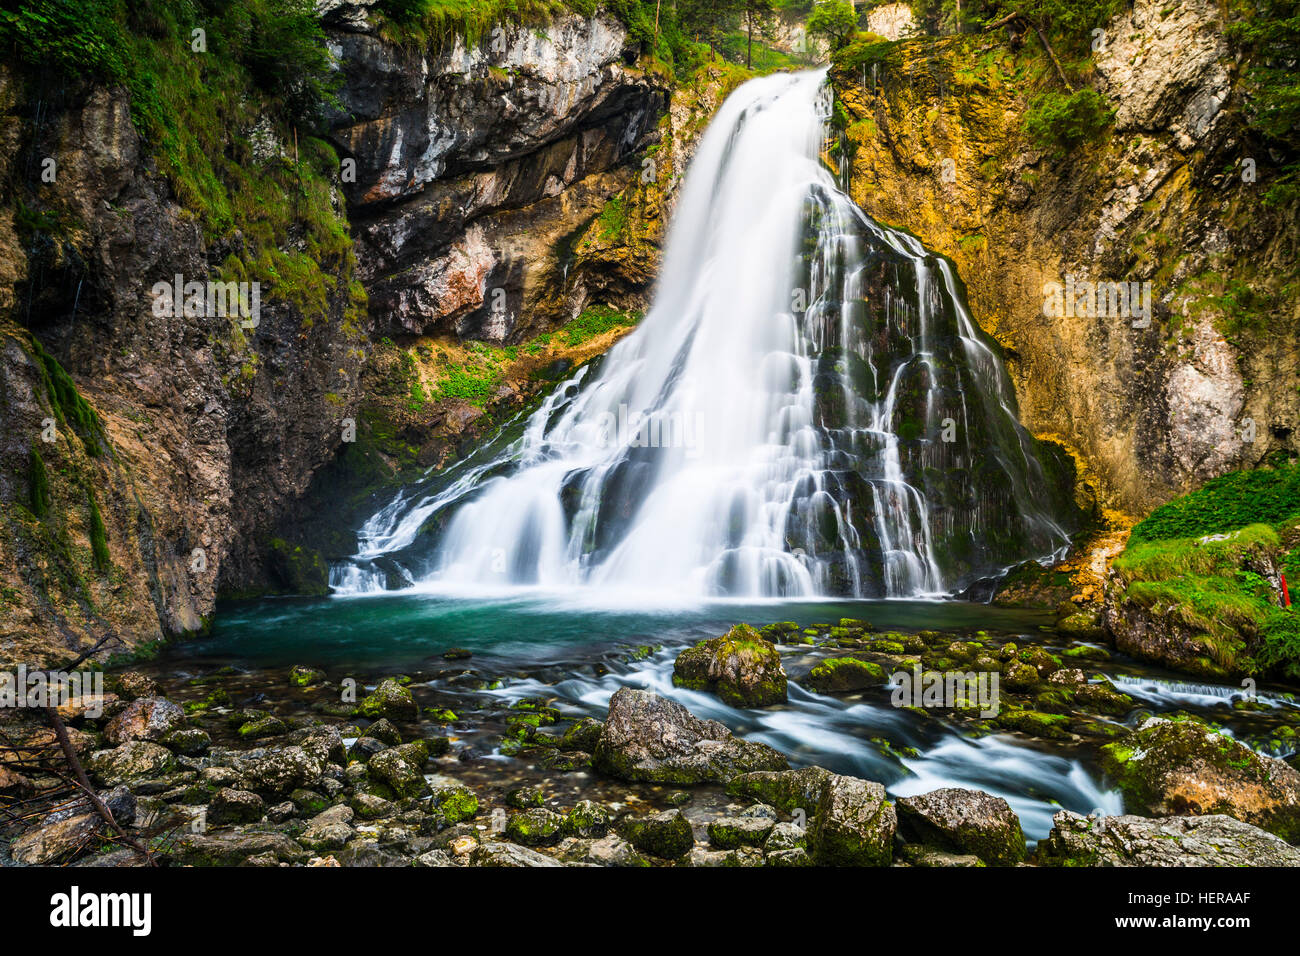 golling,hallein,Gollinger,golling waterfall,water,waterfall,austria,Ã–sterreich,osterreich salzburg,salzburg,salzburgerland,Land Salzburg,europe,alps,mountain,europe mountains,travel photography,outdoors,outside,nature,mountain scenery,mountain landscapes Stock Photo